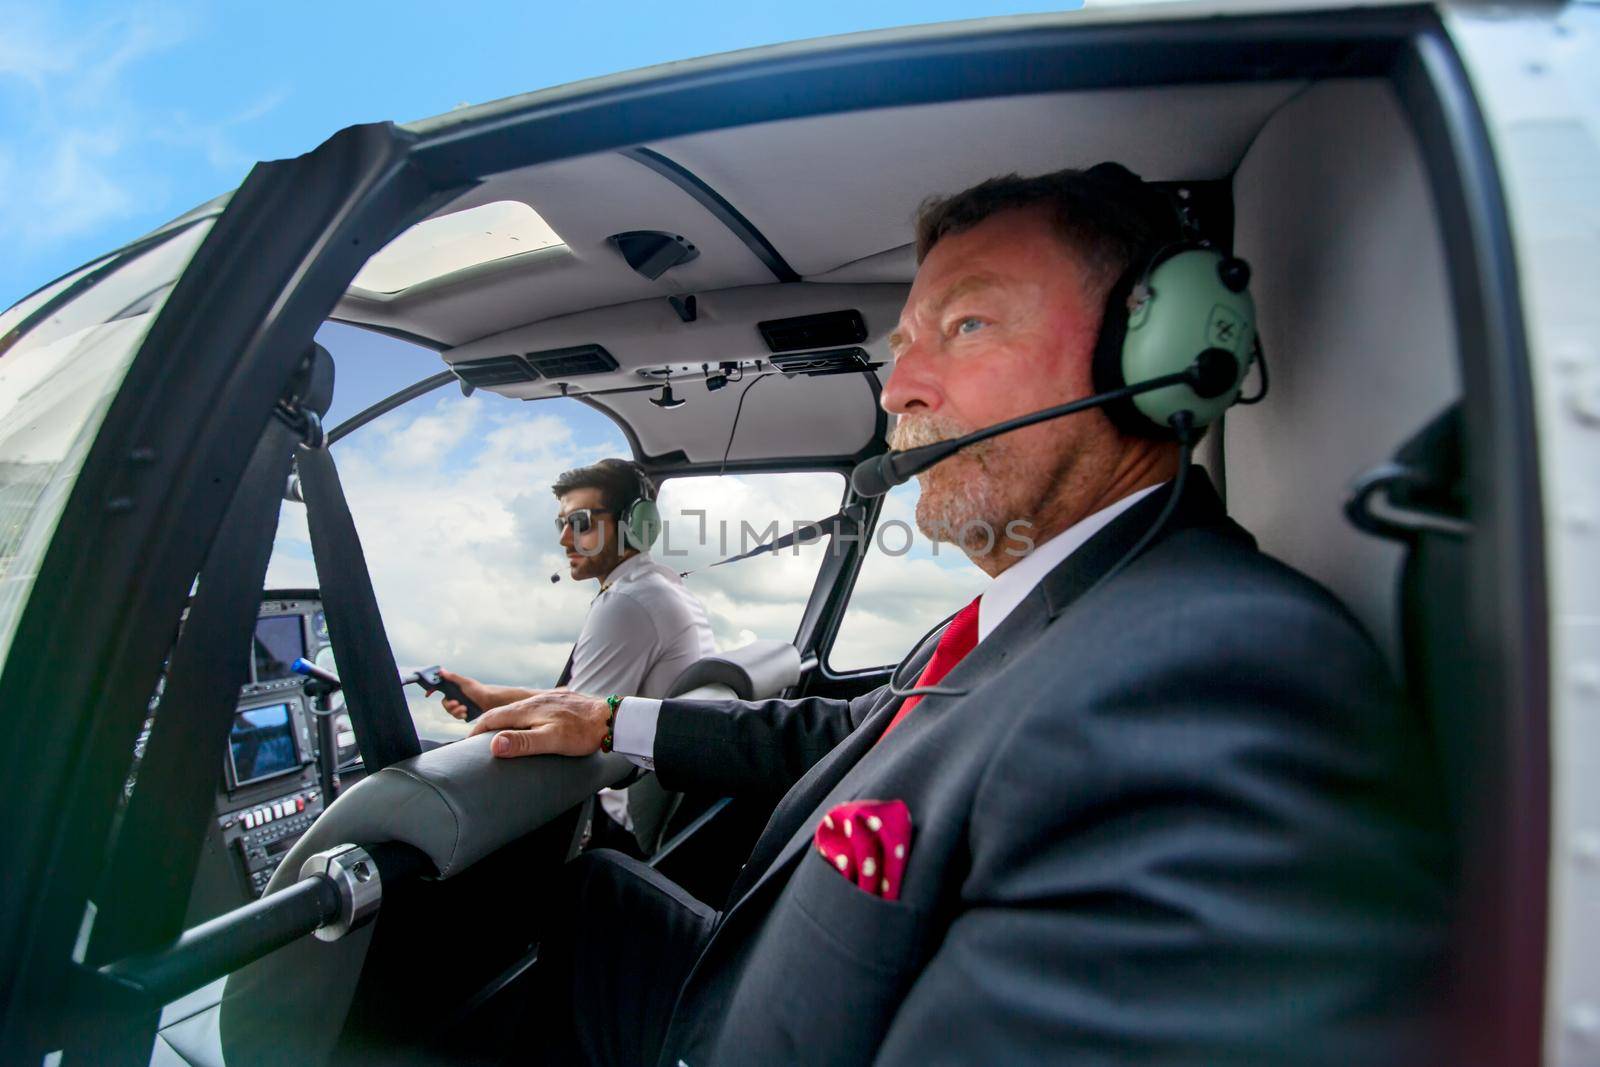 Business people traveling by helicopter , Shot of a mature businessman using a headset while traveling in a helicopter